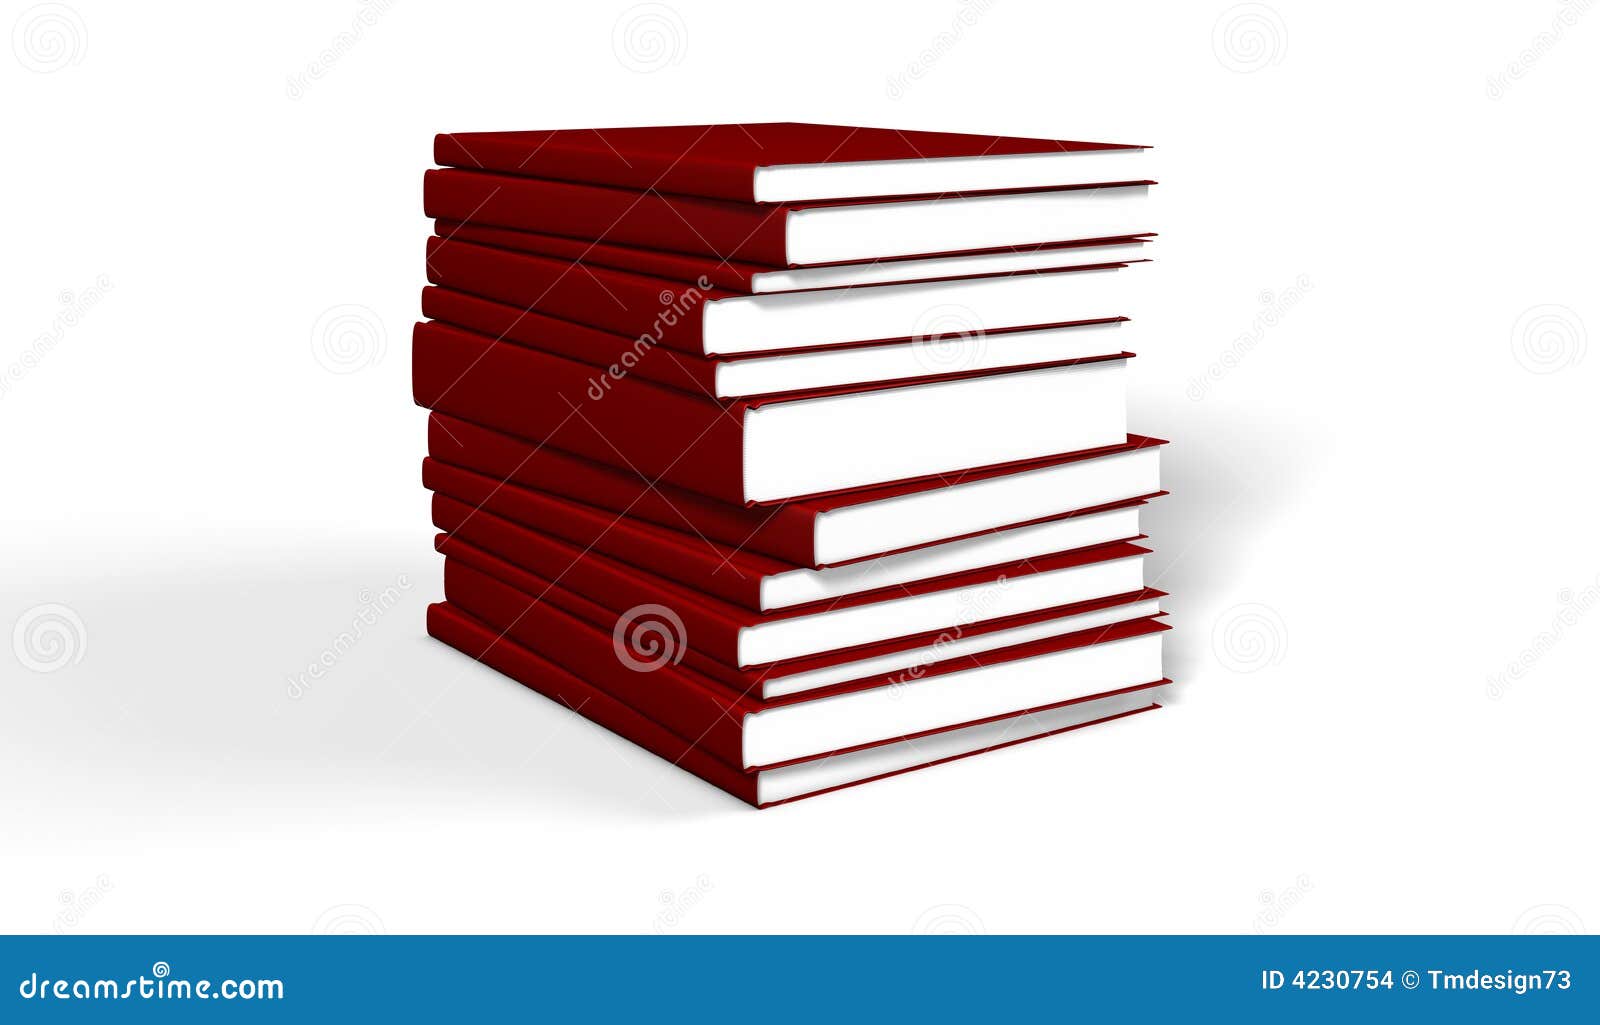 Books red on white background